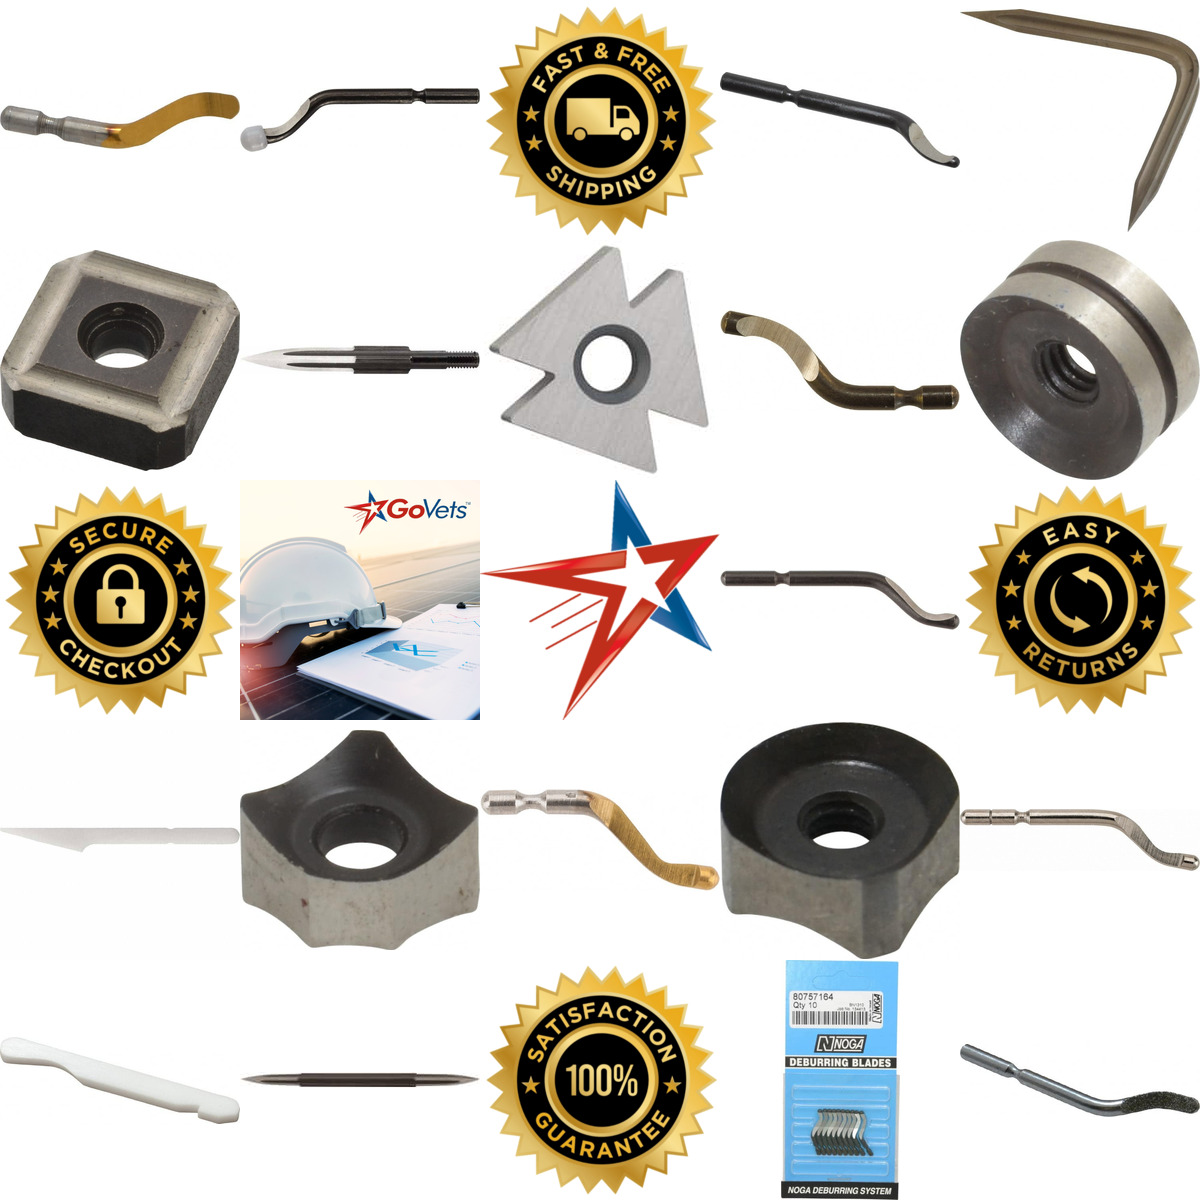 A selection of Swivel and Scraper Blades products on GoVets